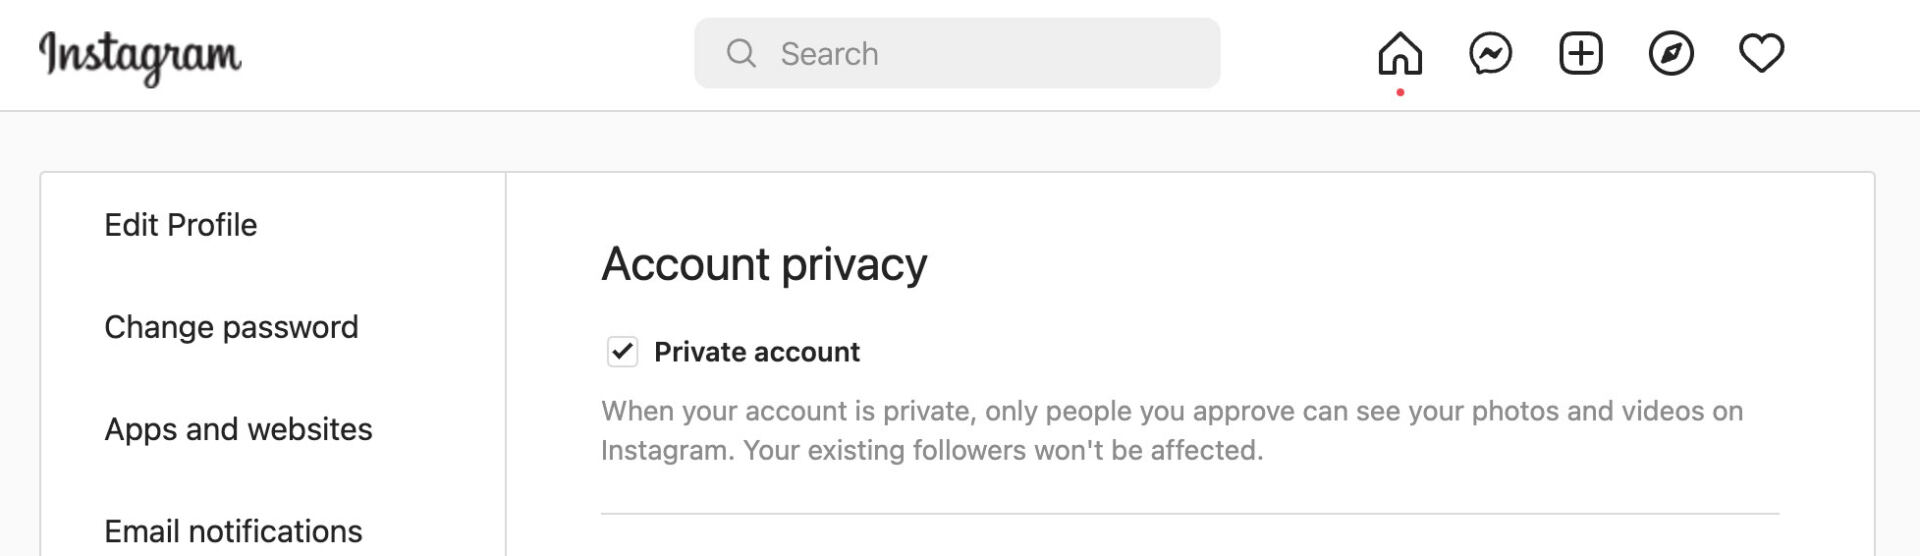 account set to private